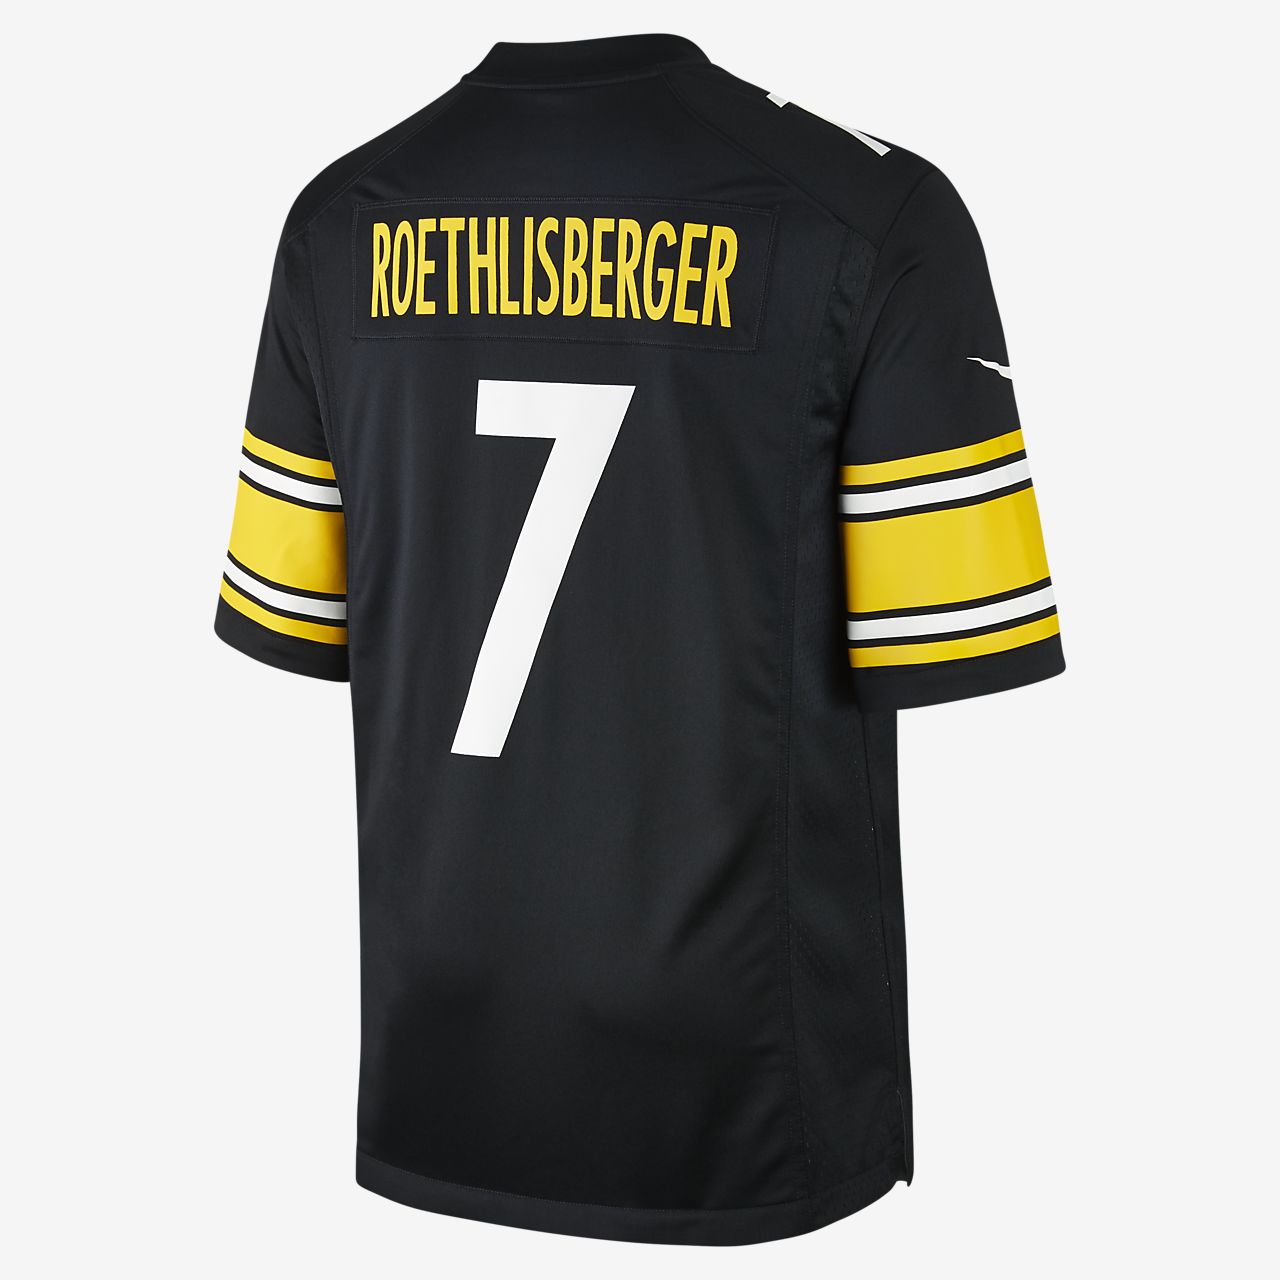 where can i buy a steelers shirt